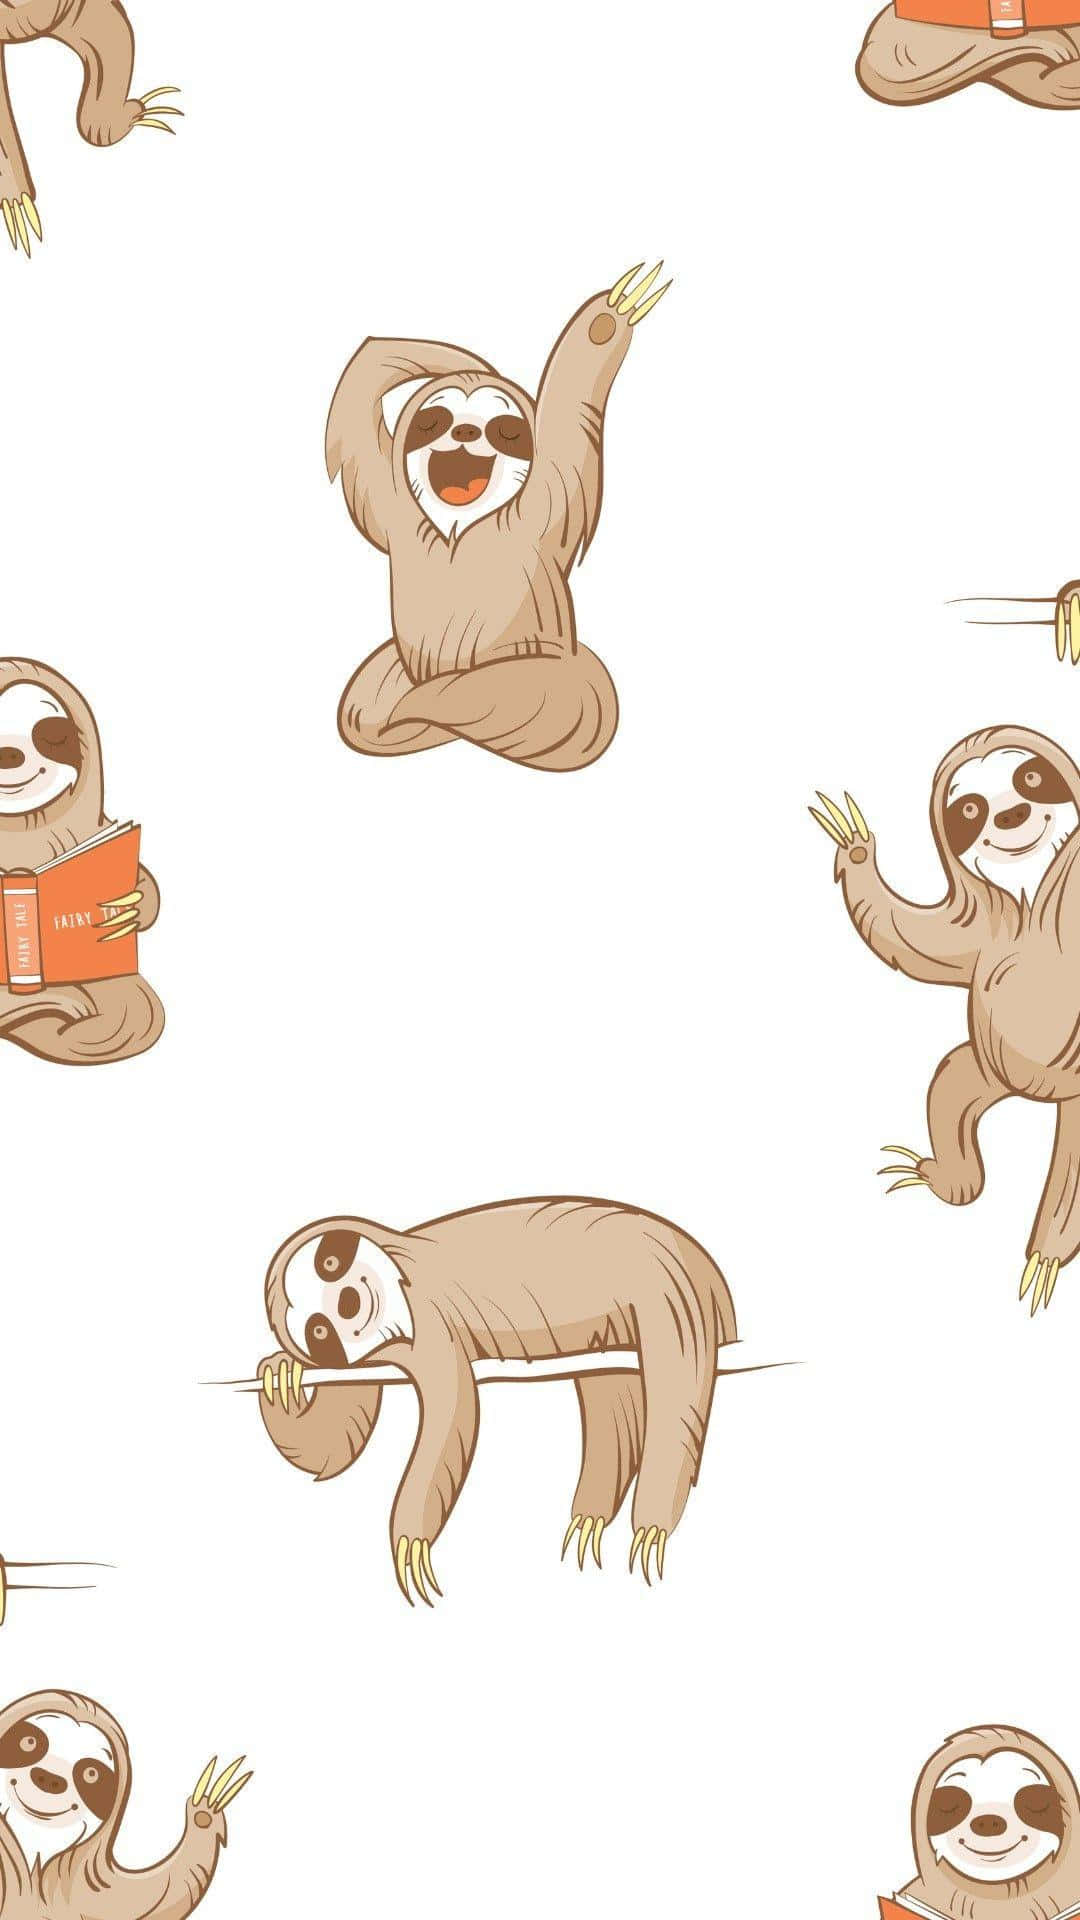 Adorable Kawaii Sloth Hanging from a Branch Wallpaper